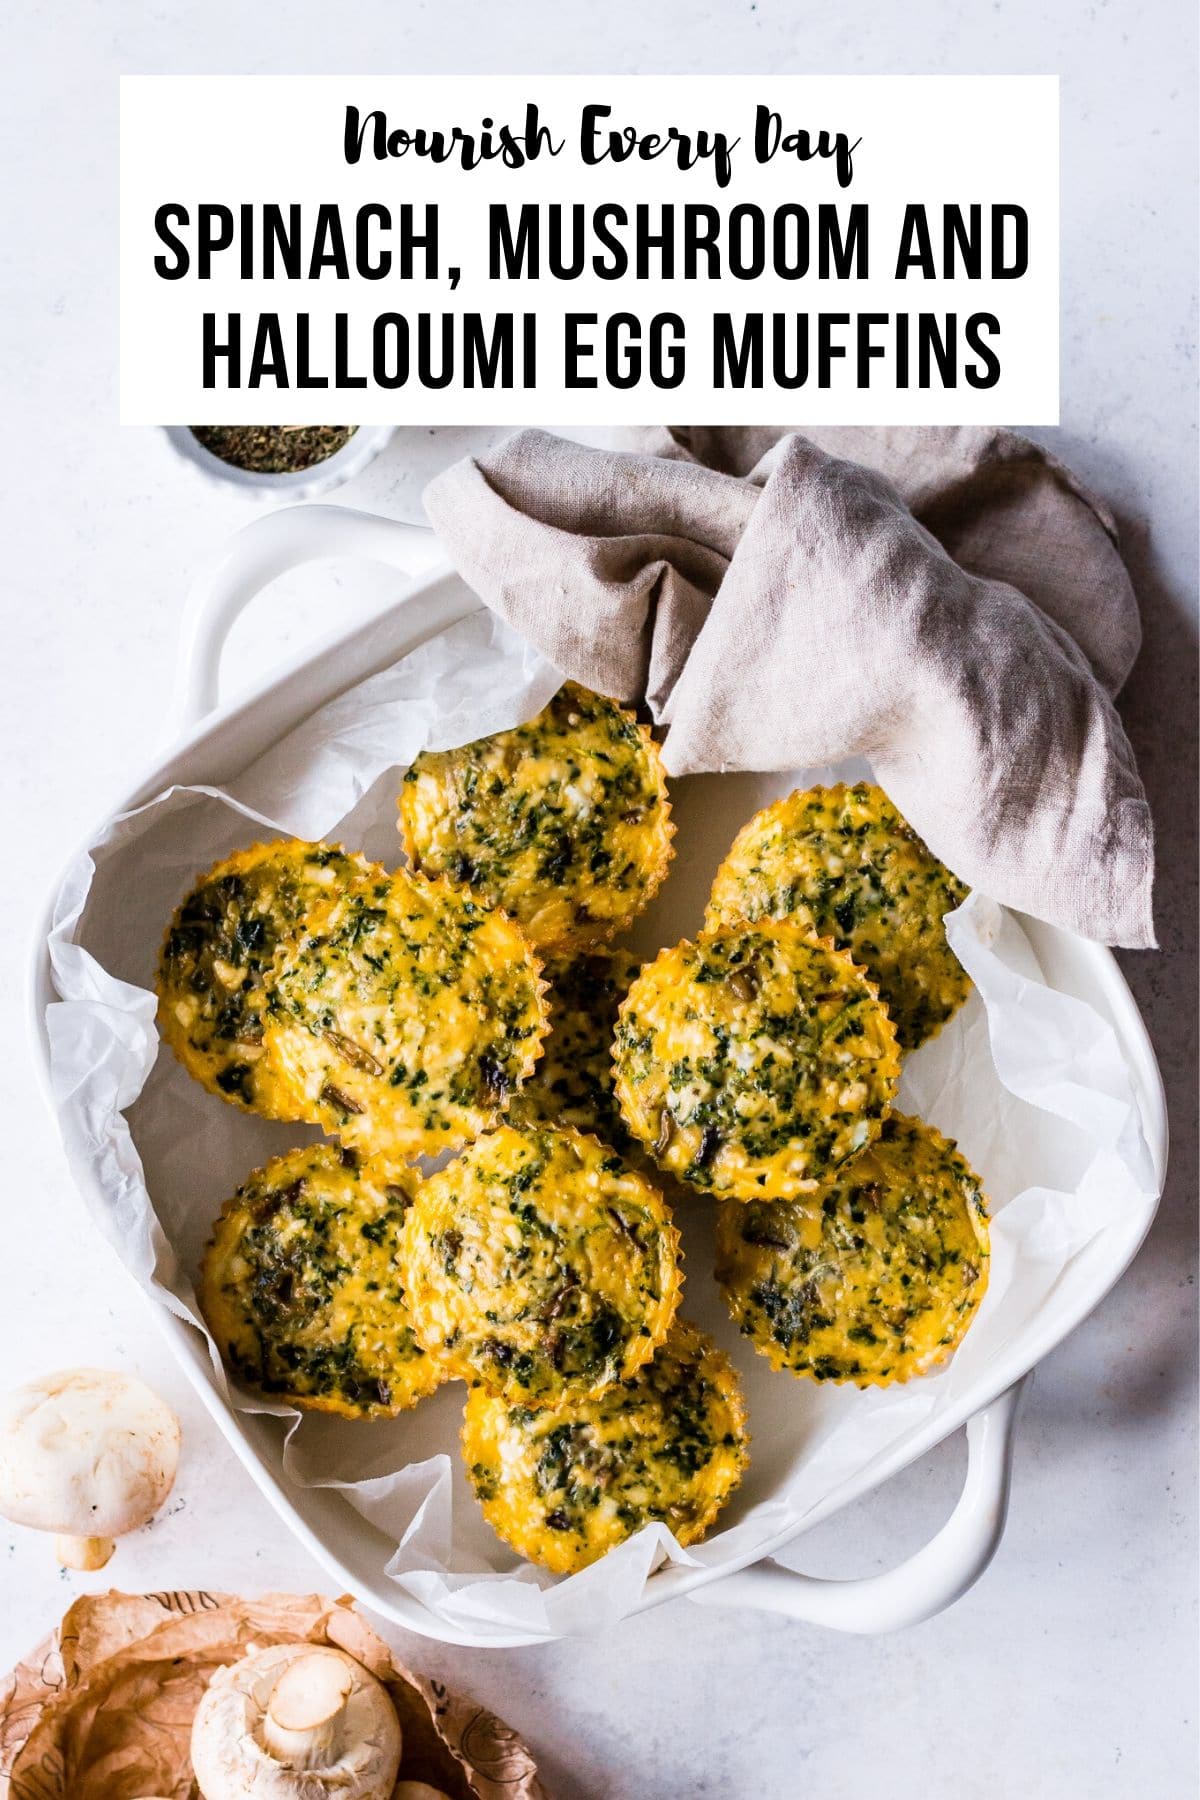 Spinach, Mushroom and Halloumi Egg Muffins Recipe by Nourish Every Day